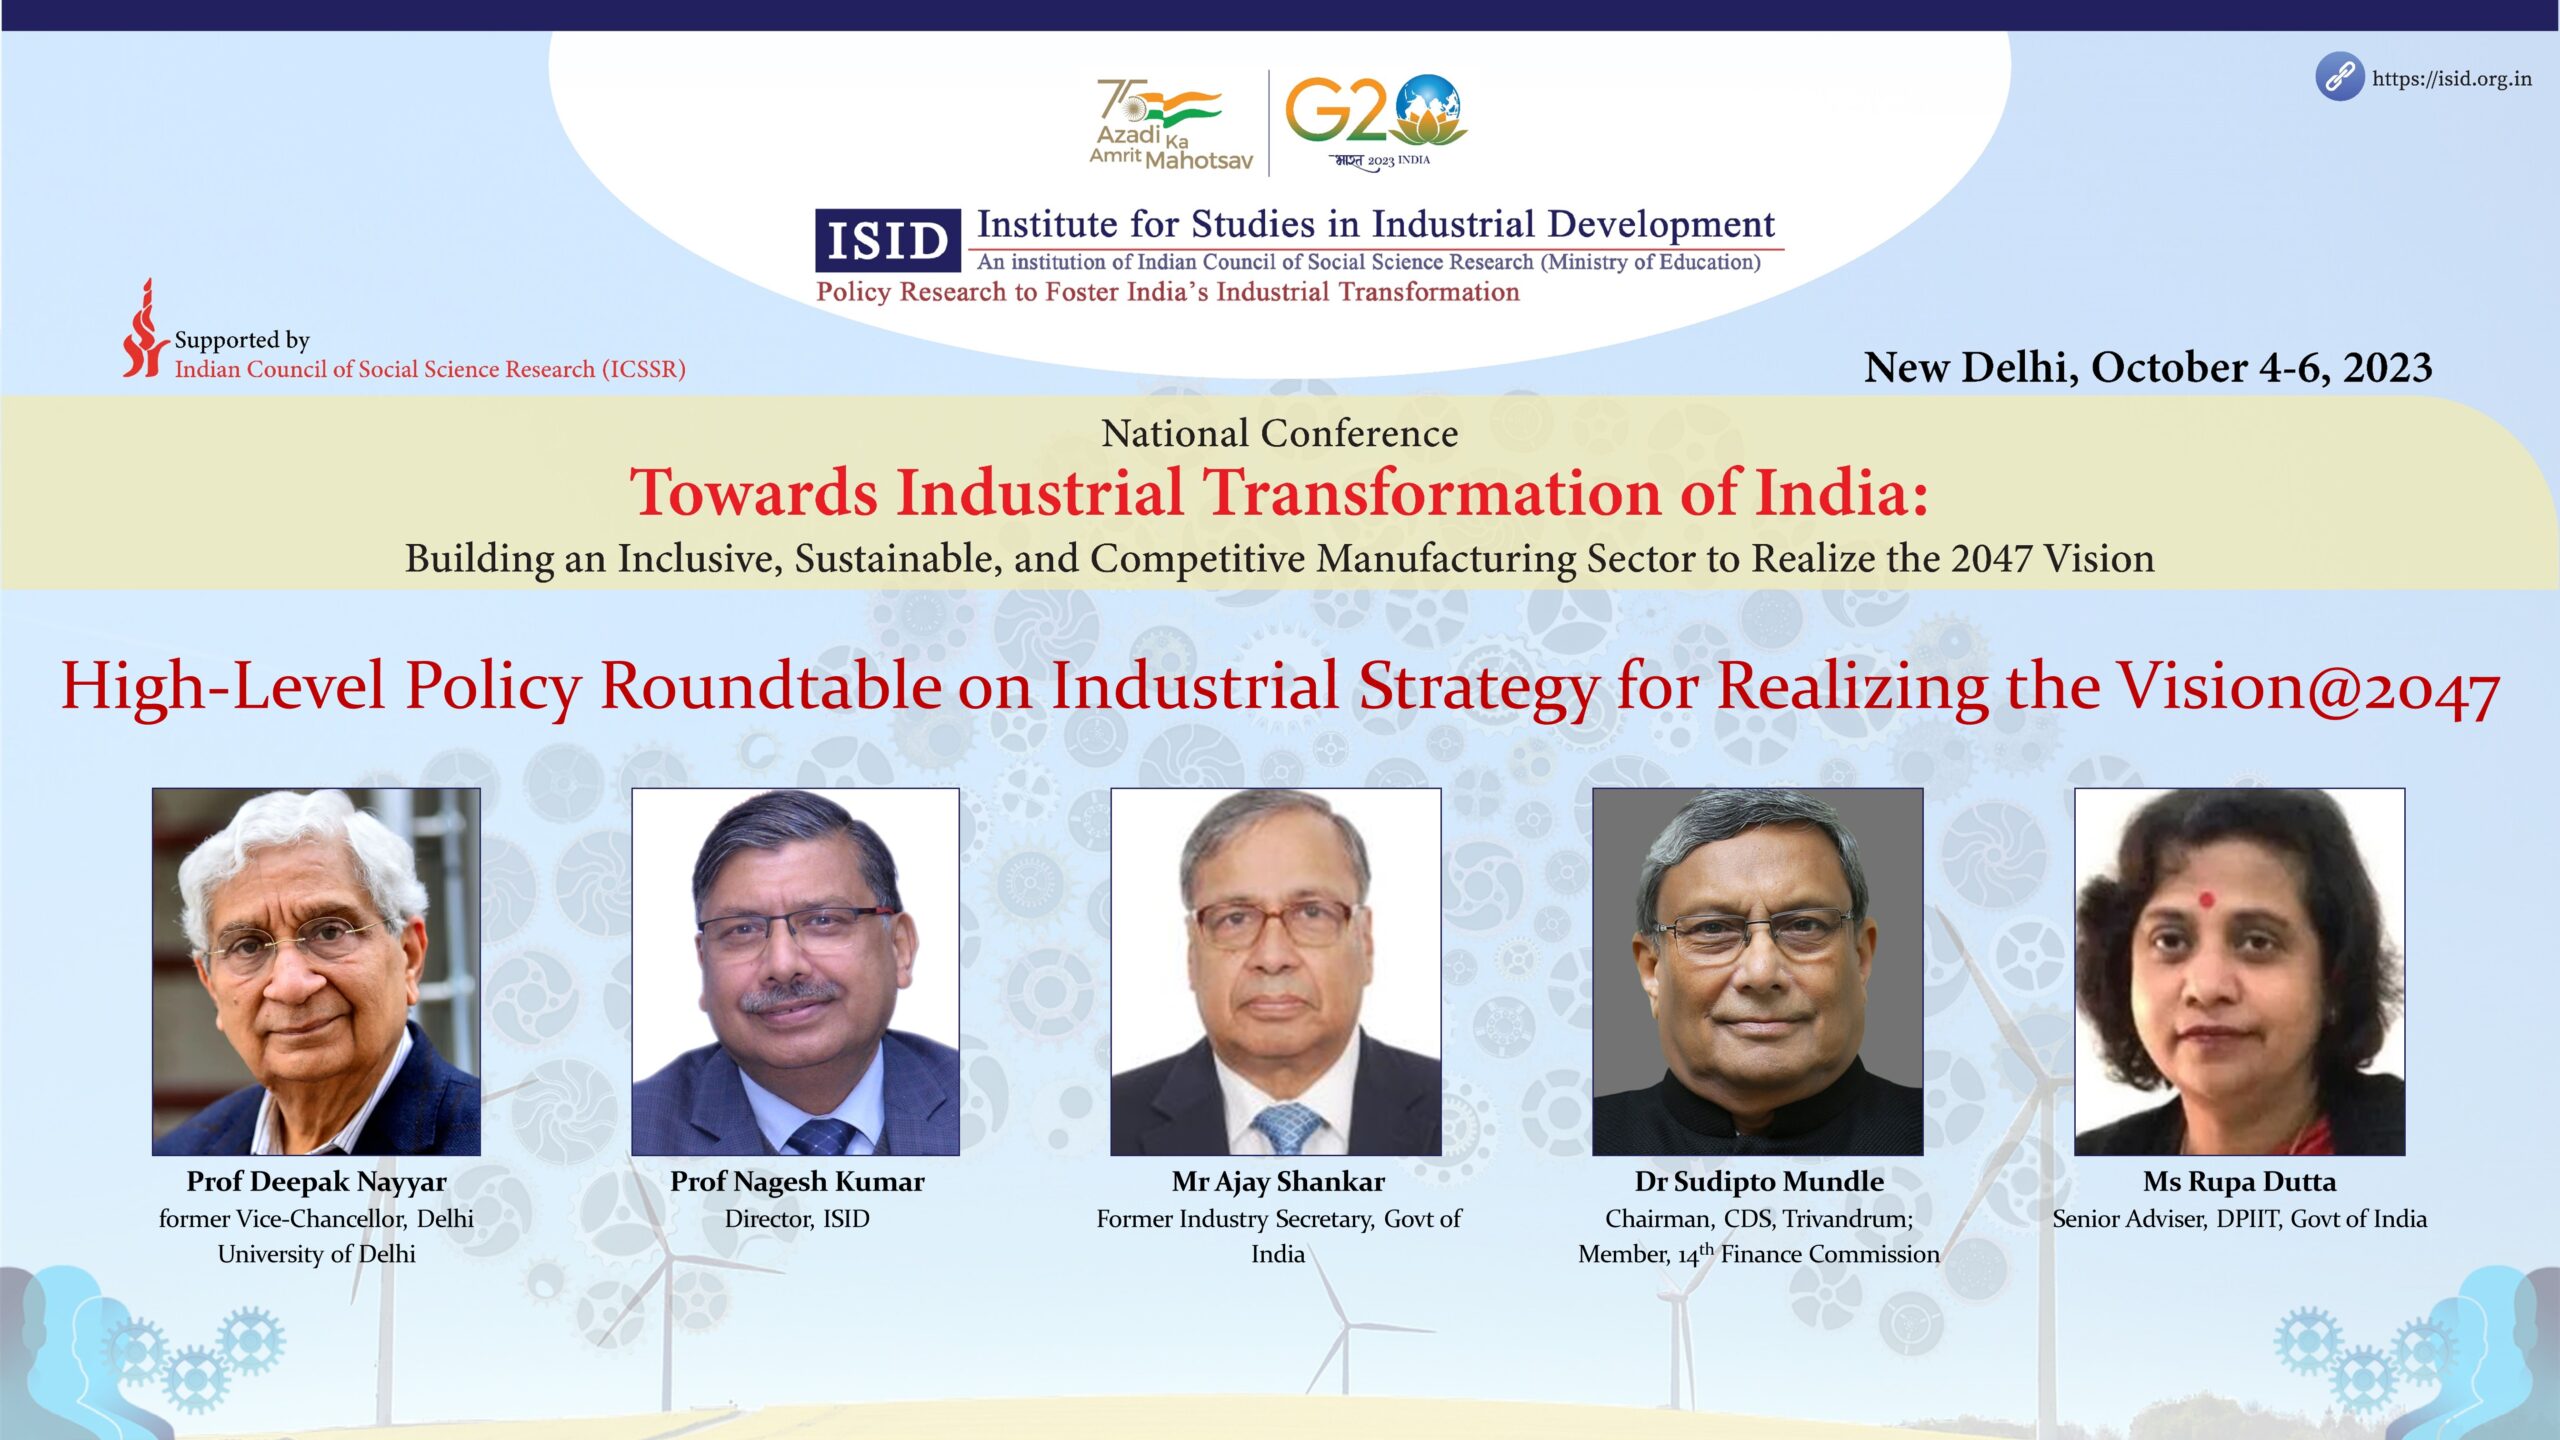 Plenary Session 2: High-Level Policy Roundtable on Industrial Strategy for Realizing the Vision@2047